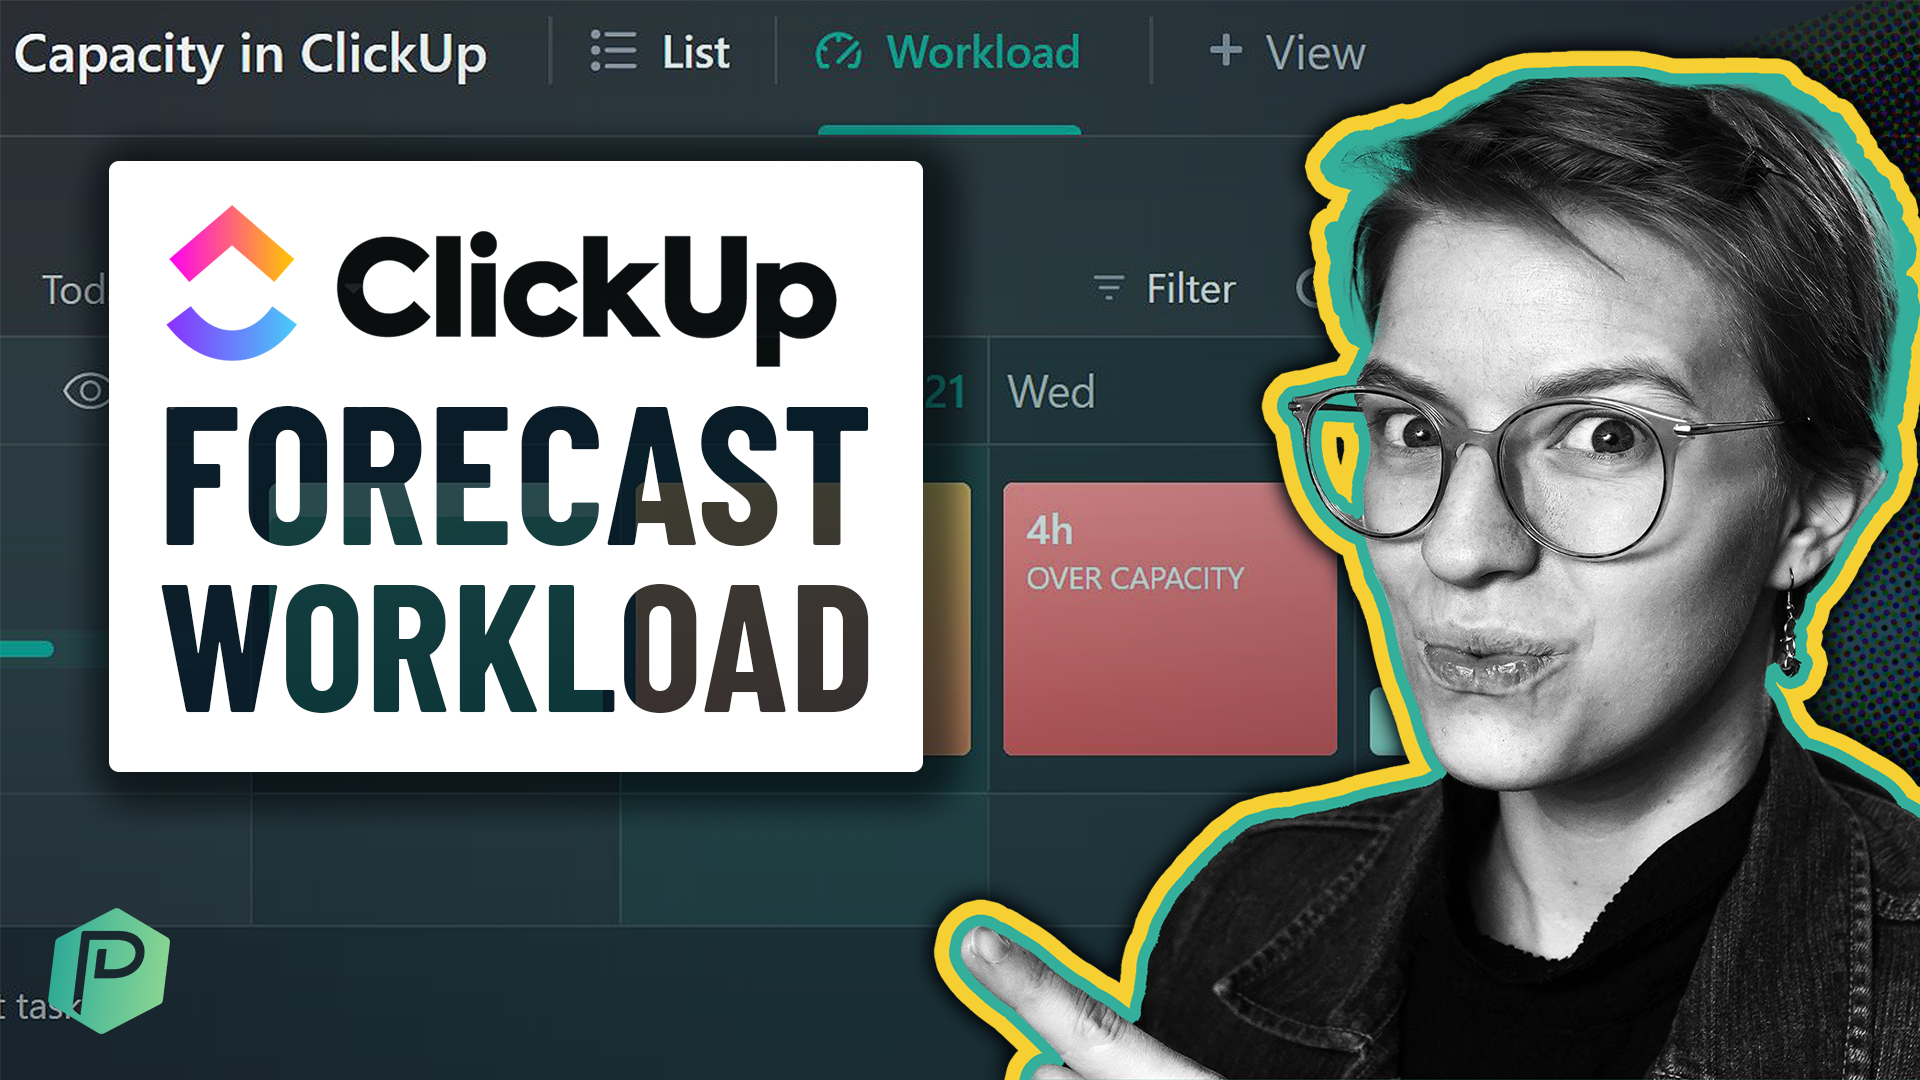 Weekly Review: How to Forecast Work Capacity in ClickUp